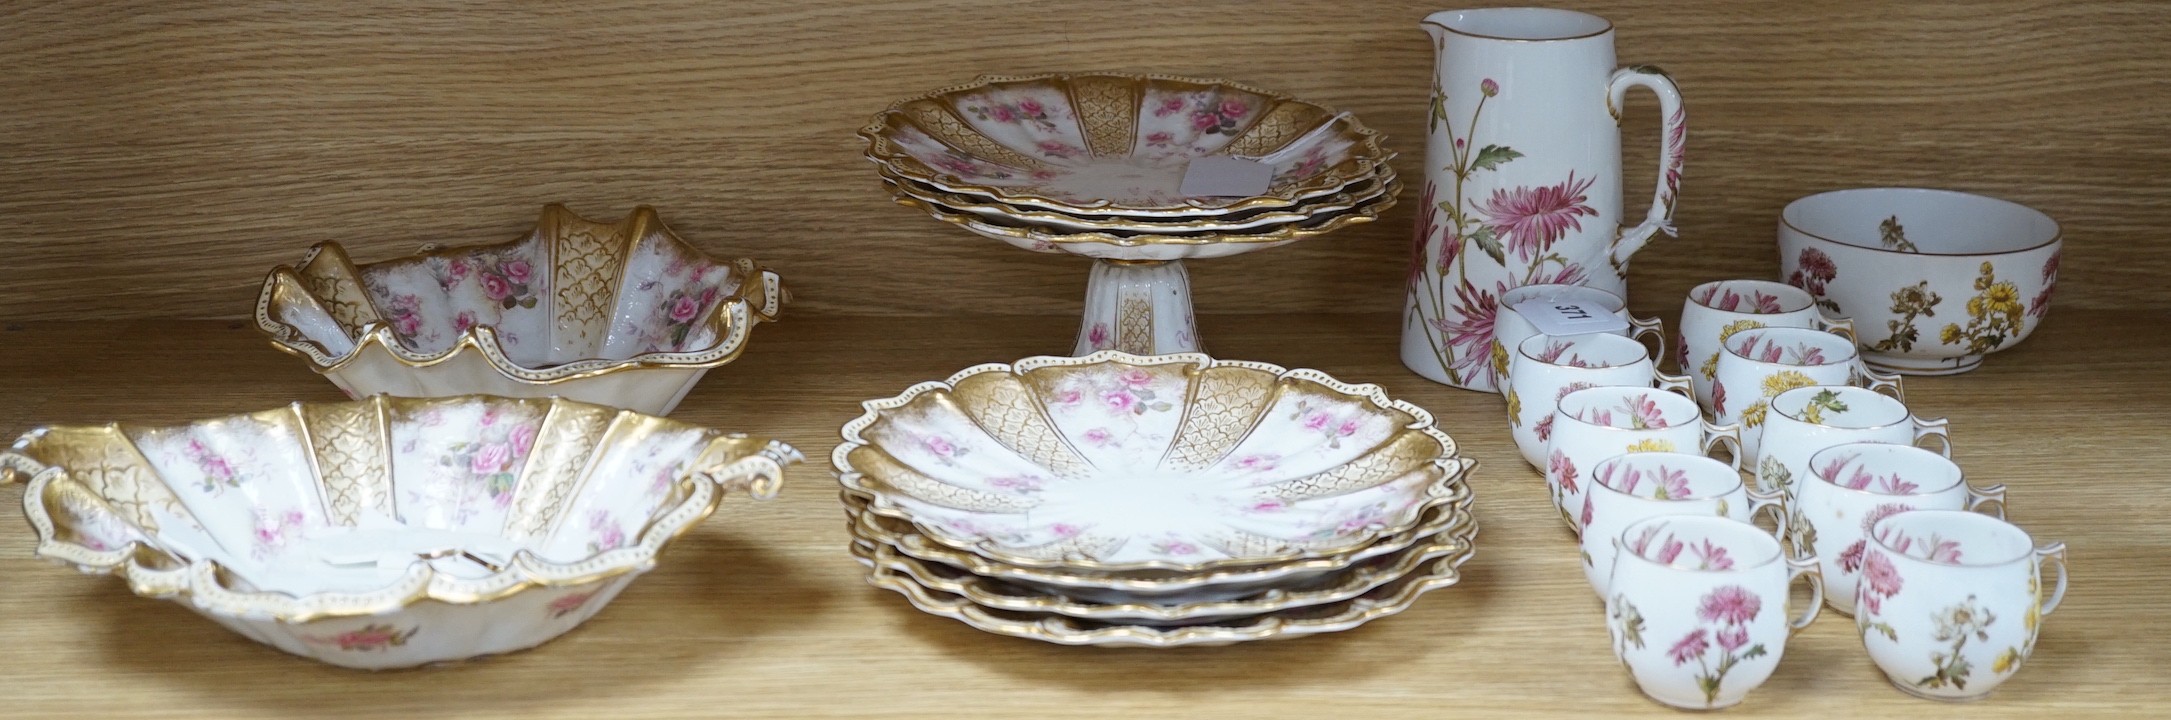 A selection of George Jones and Sons ‘Chrysanthemum’ wares, together with George Jones and Sons crescent China wares